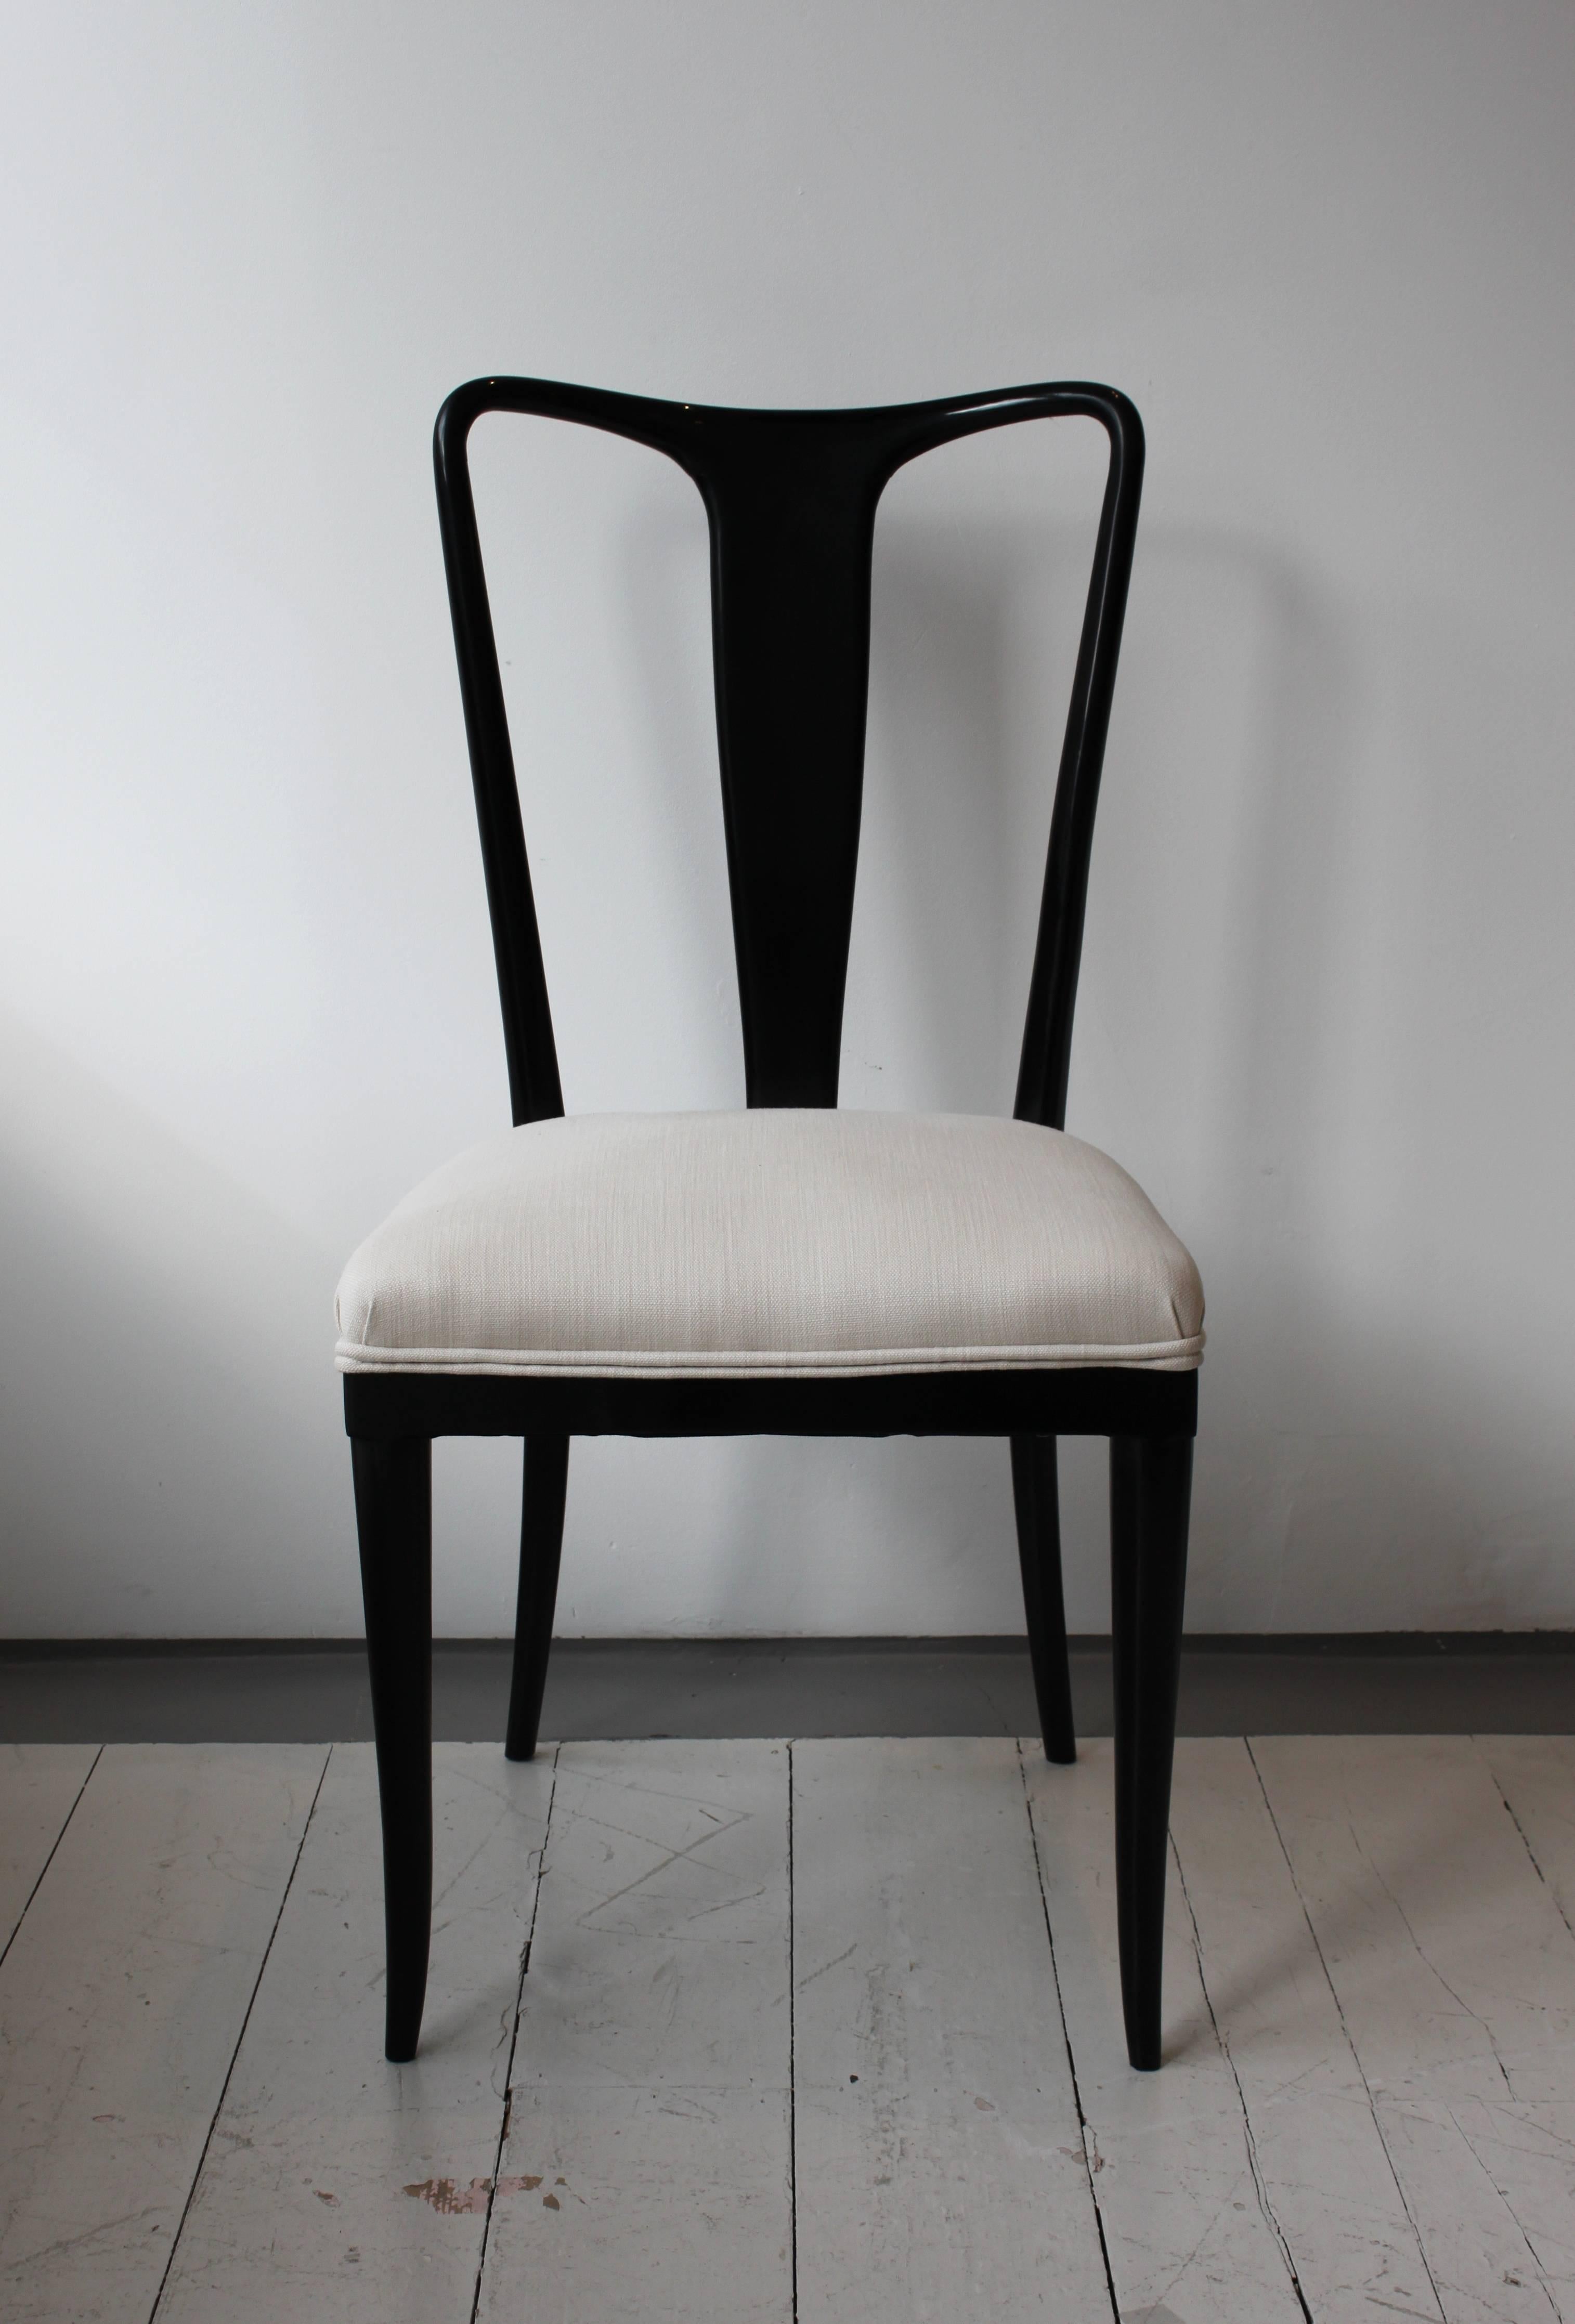 Set of six black lacquered dining chairs by Ulrich.

Seats reupholstered in neutral fabric.

Italian, late 1940s